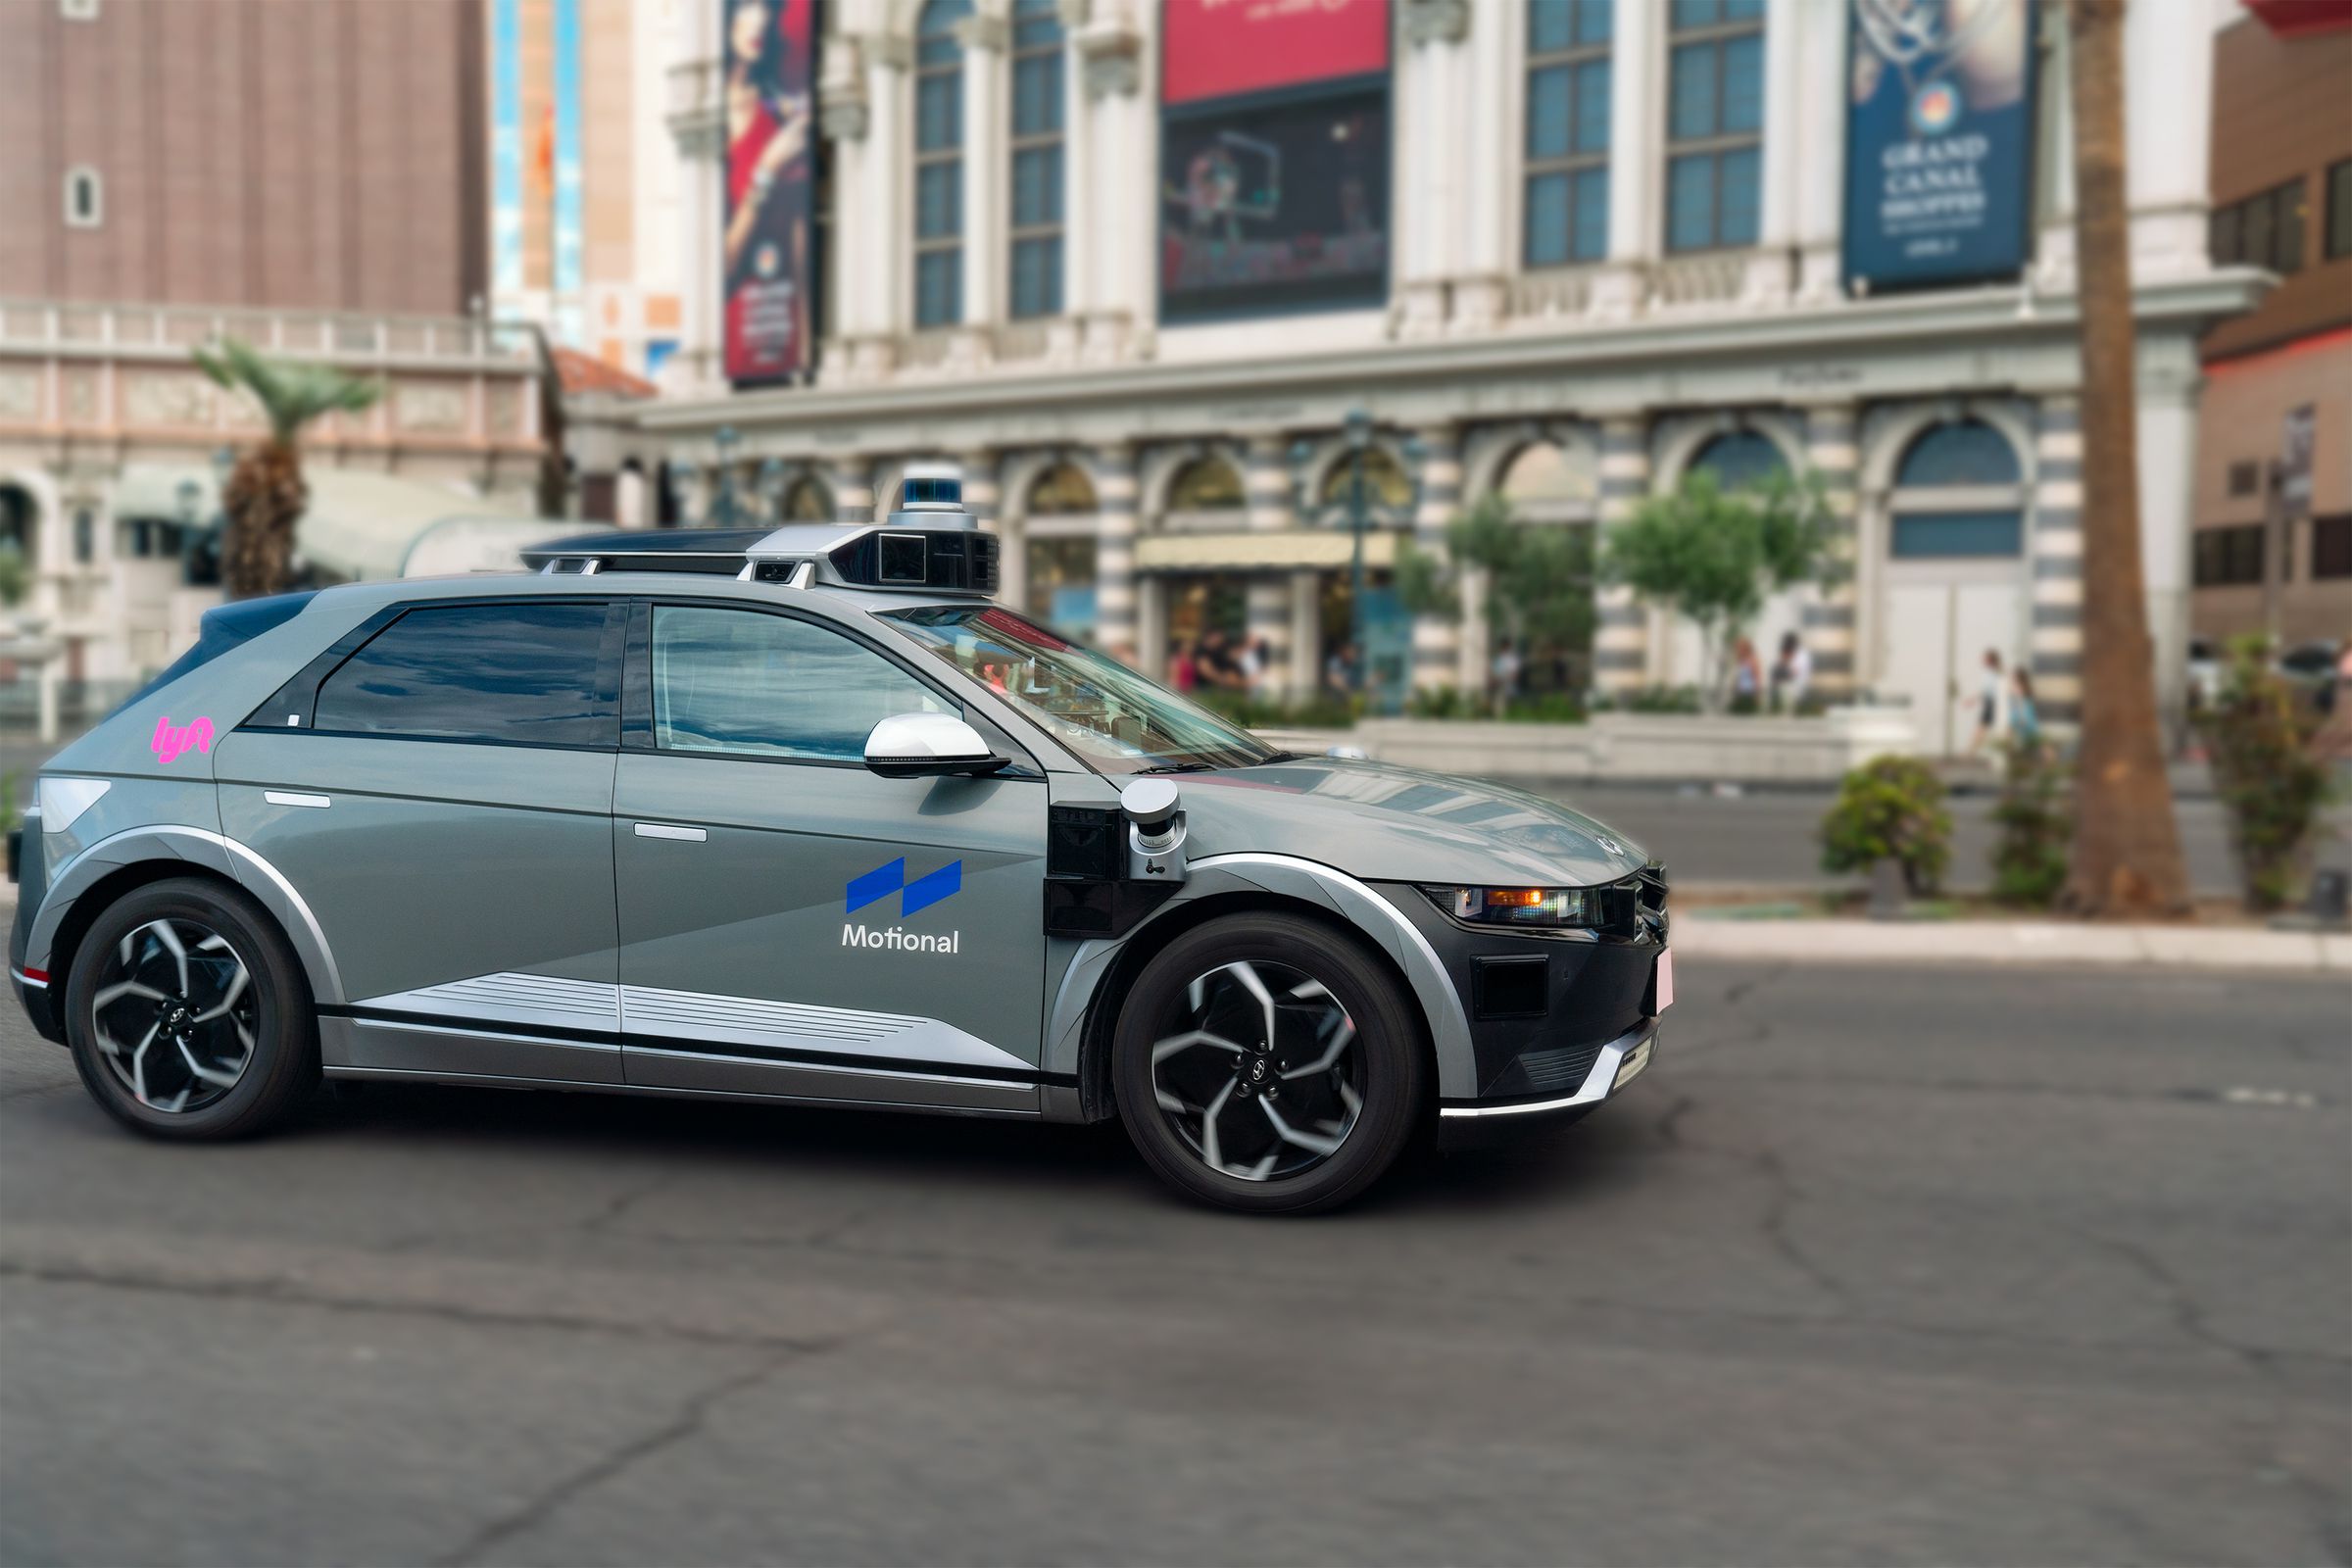 Motional’s all-electric, autonomous Hyundai vehicles are available on the Lyft app in Las Vegas.